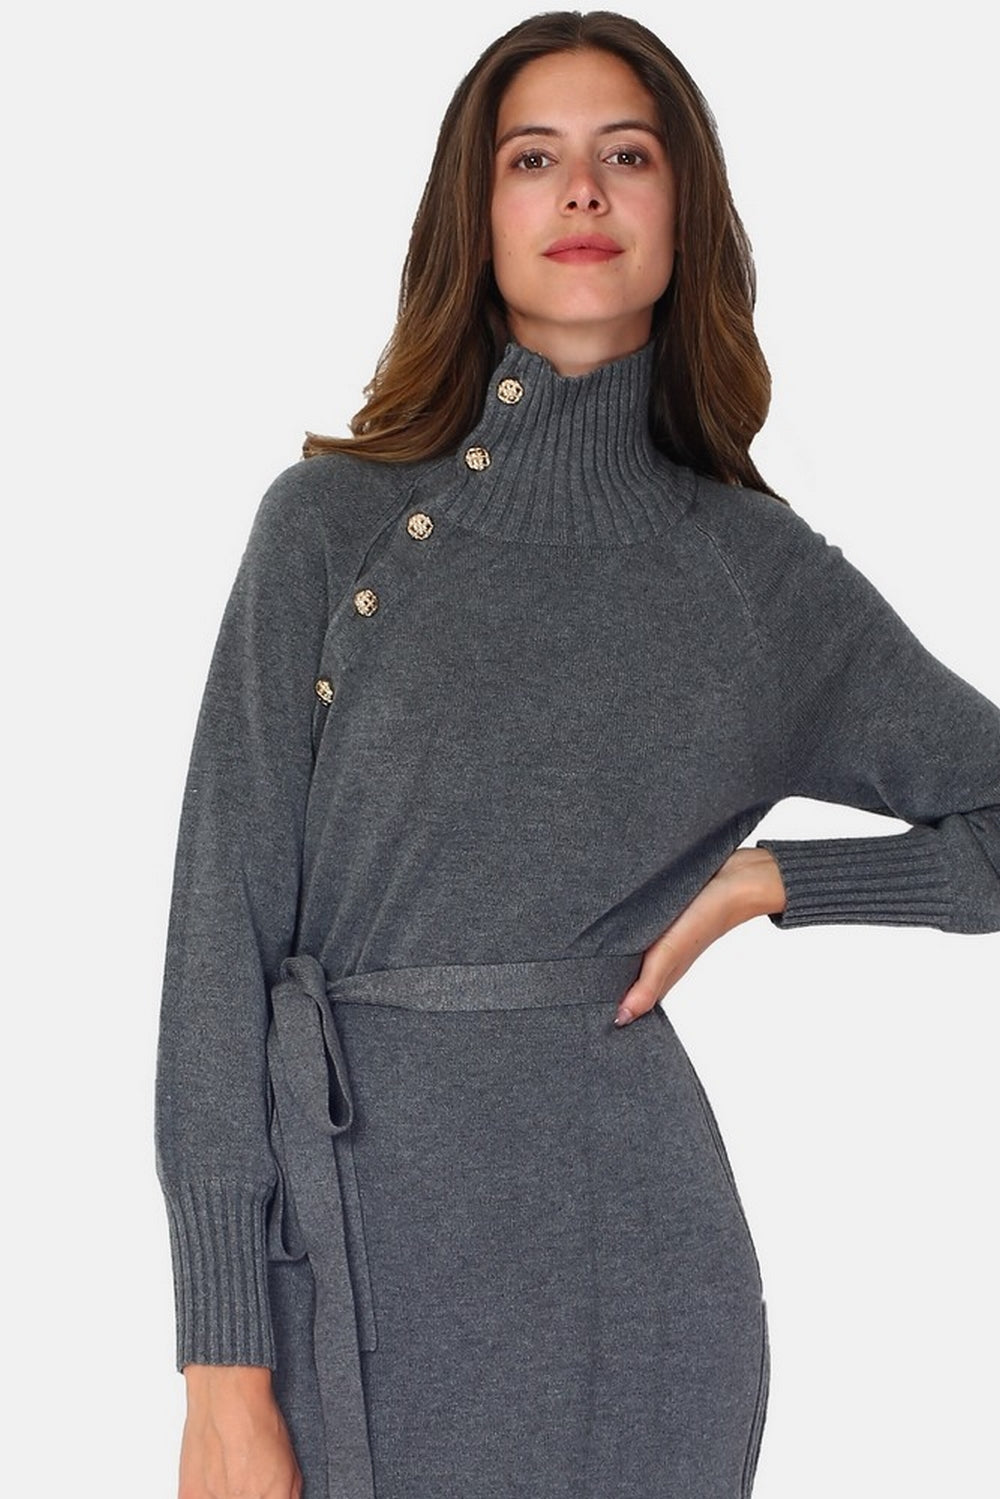 Long high neck dress closed by a button placket in front, rib knit on the sides with long slightly puff sleeved belt